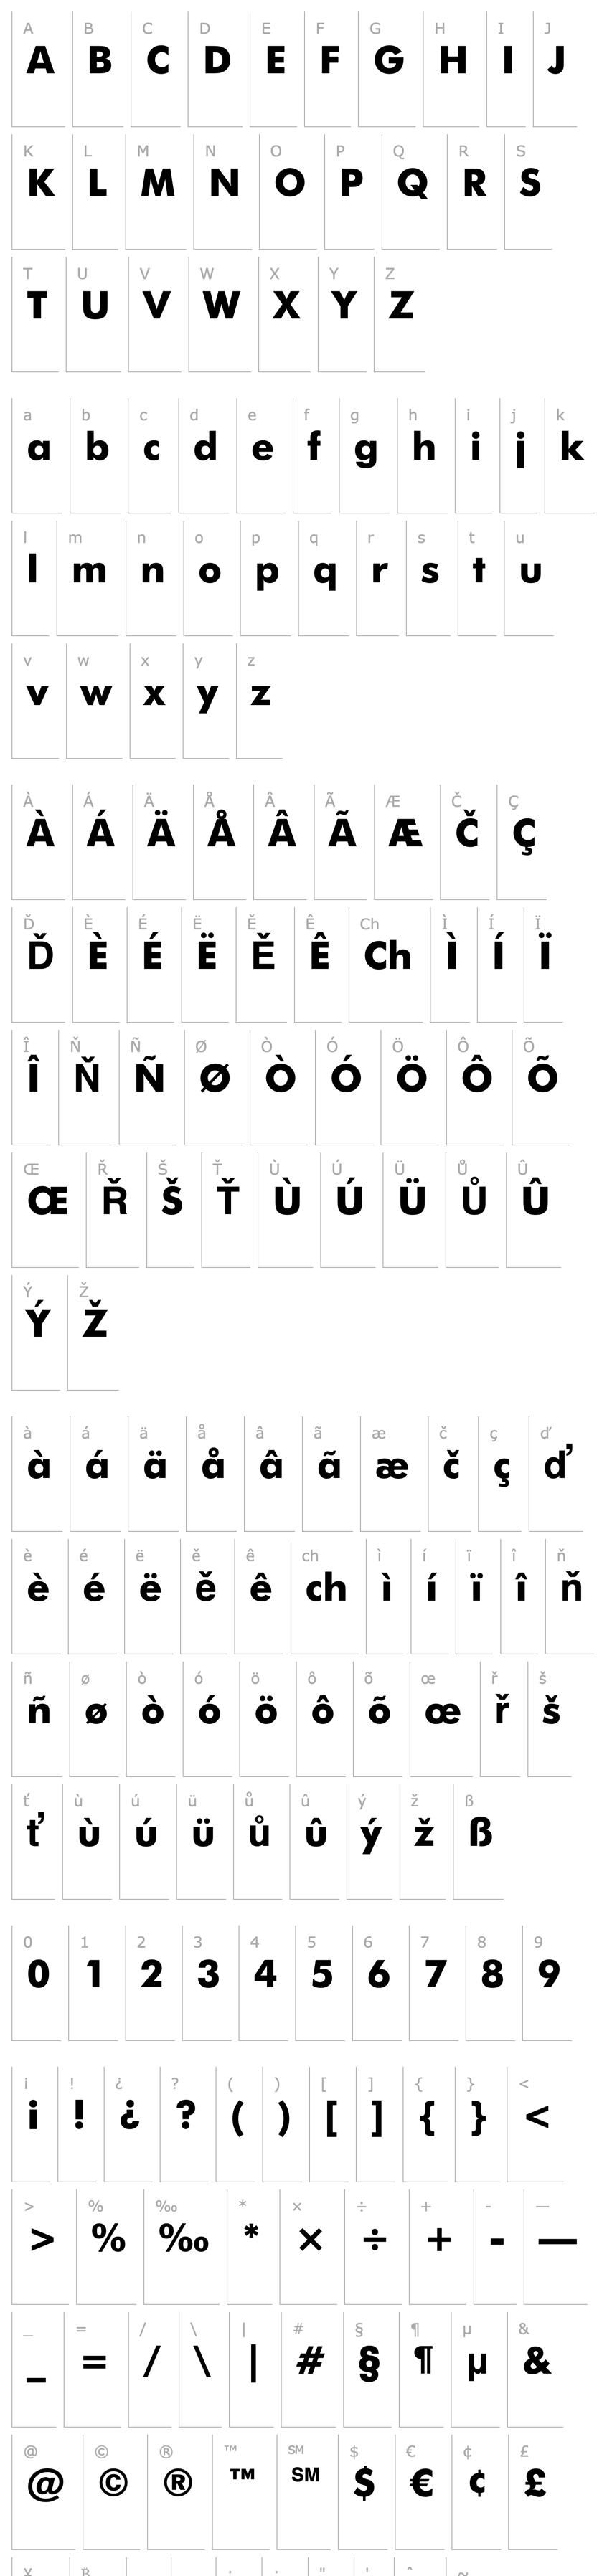 Overview font200